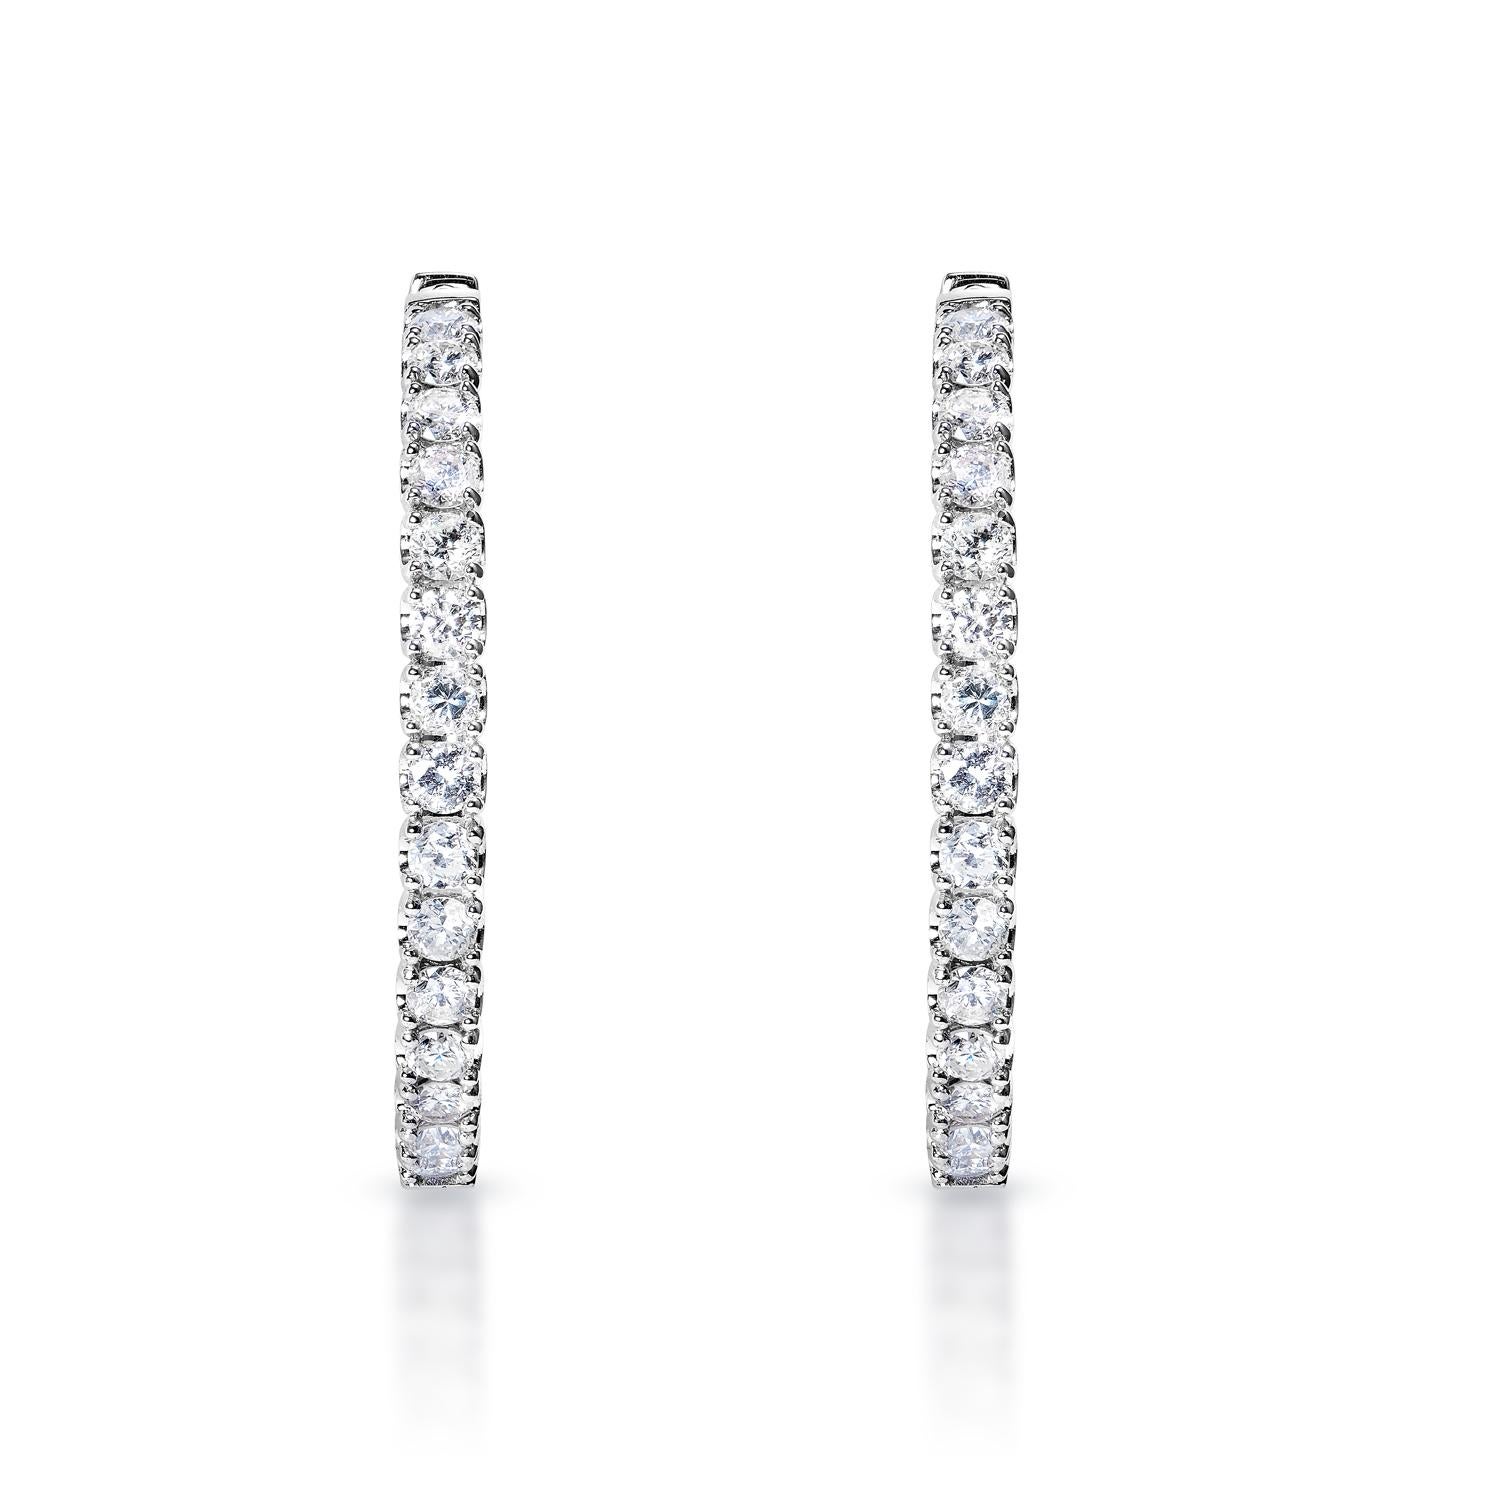 Diamond Hoop Earrings:

Carat Weight: 4.10 Carats
Shape: Round Brilliant Cut
Metal: 14 Karat White Gold
Style: Hoop Earrings

 

Also Available in Yellow Gold